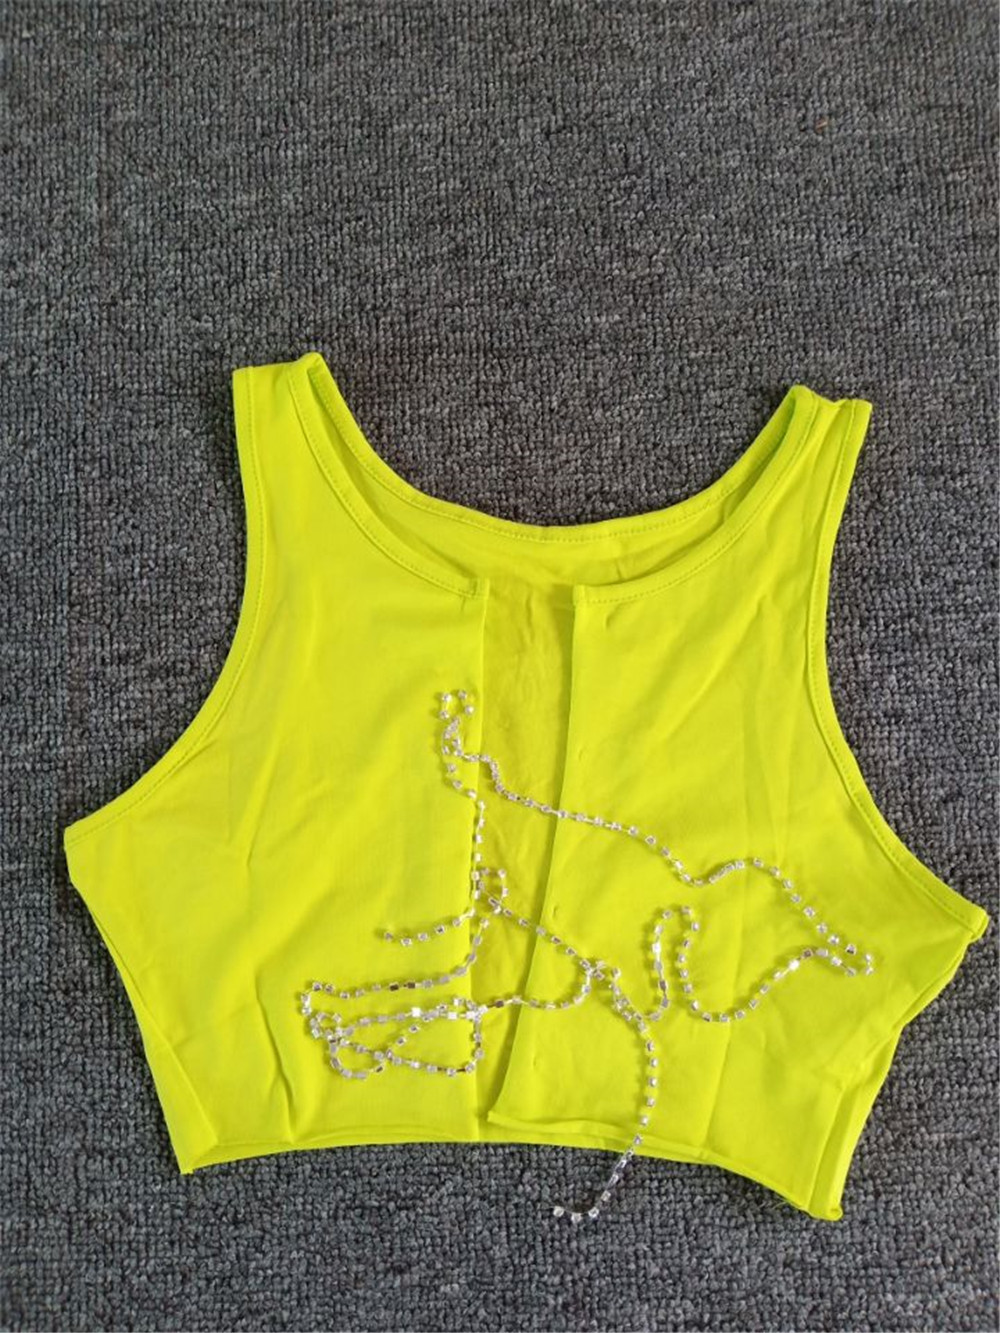 fluorescent green(With chain)